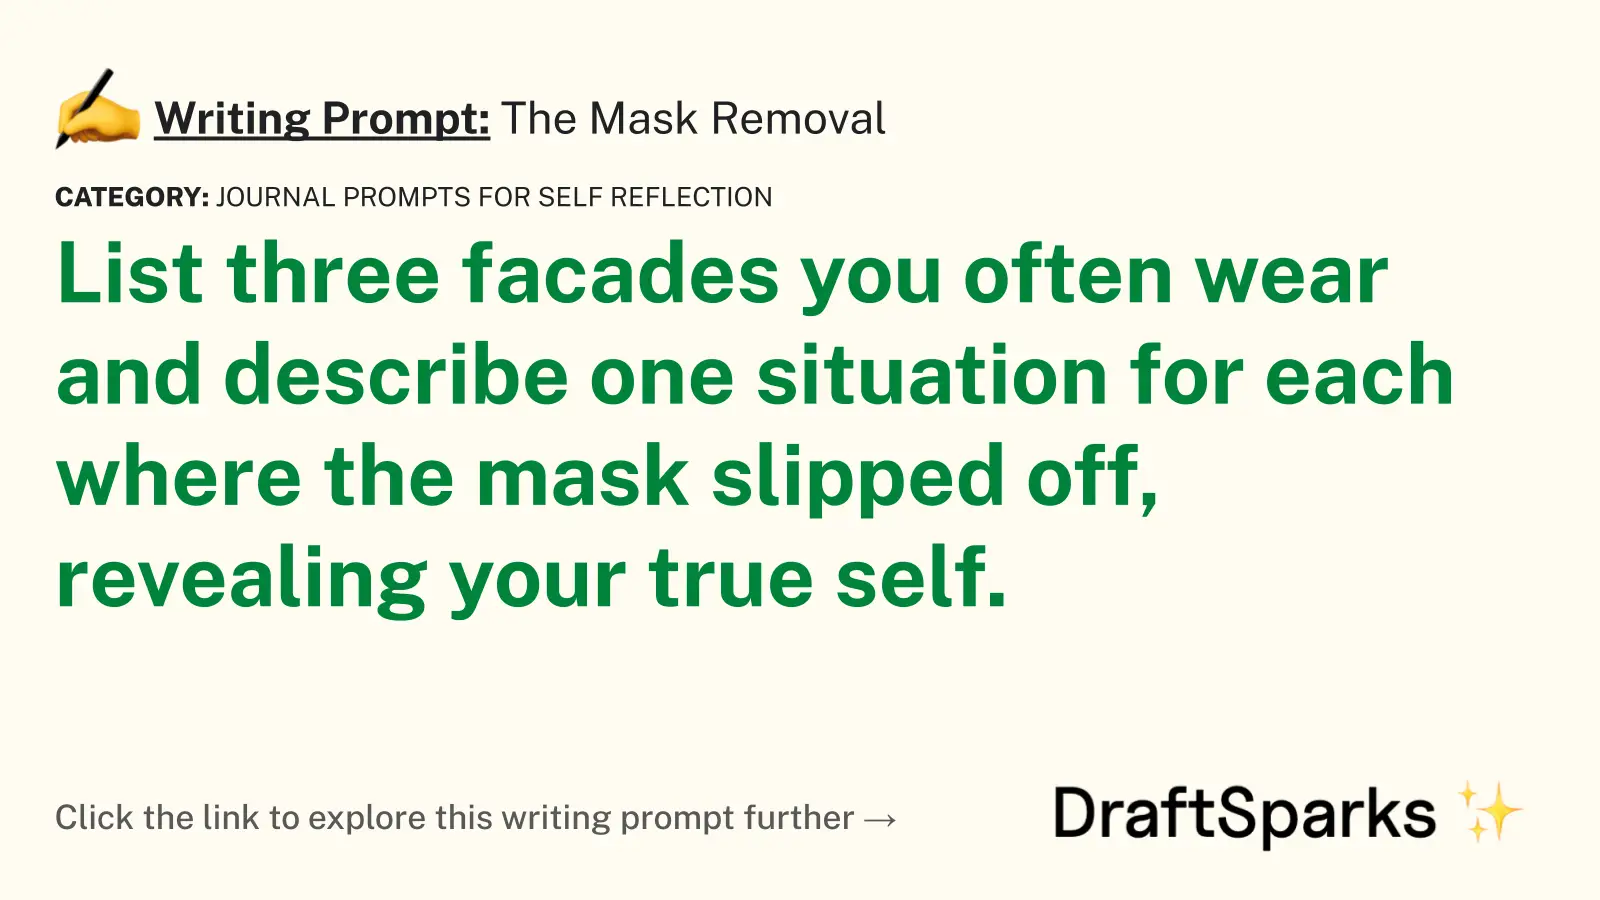 The Mask Removal